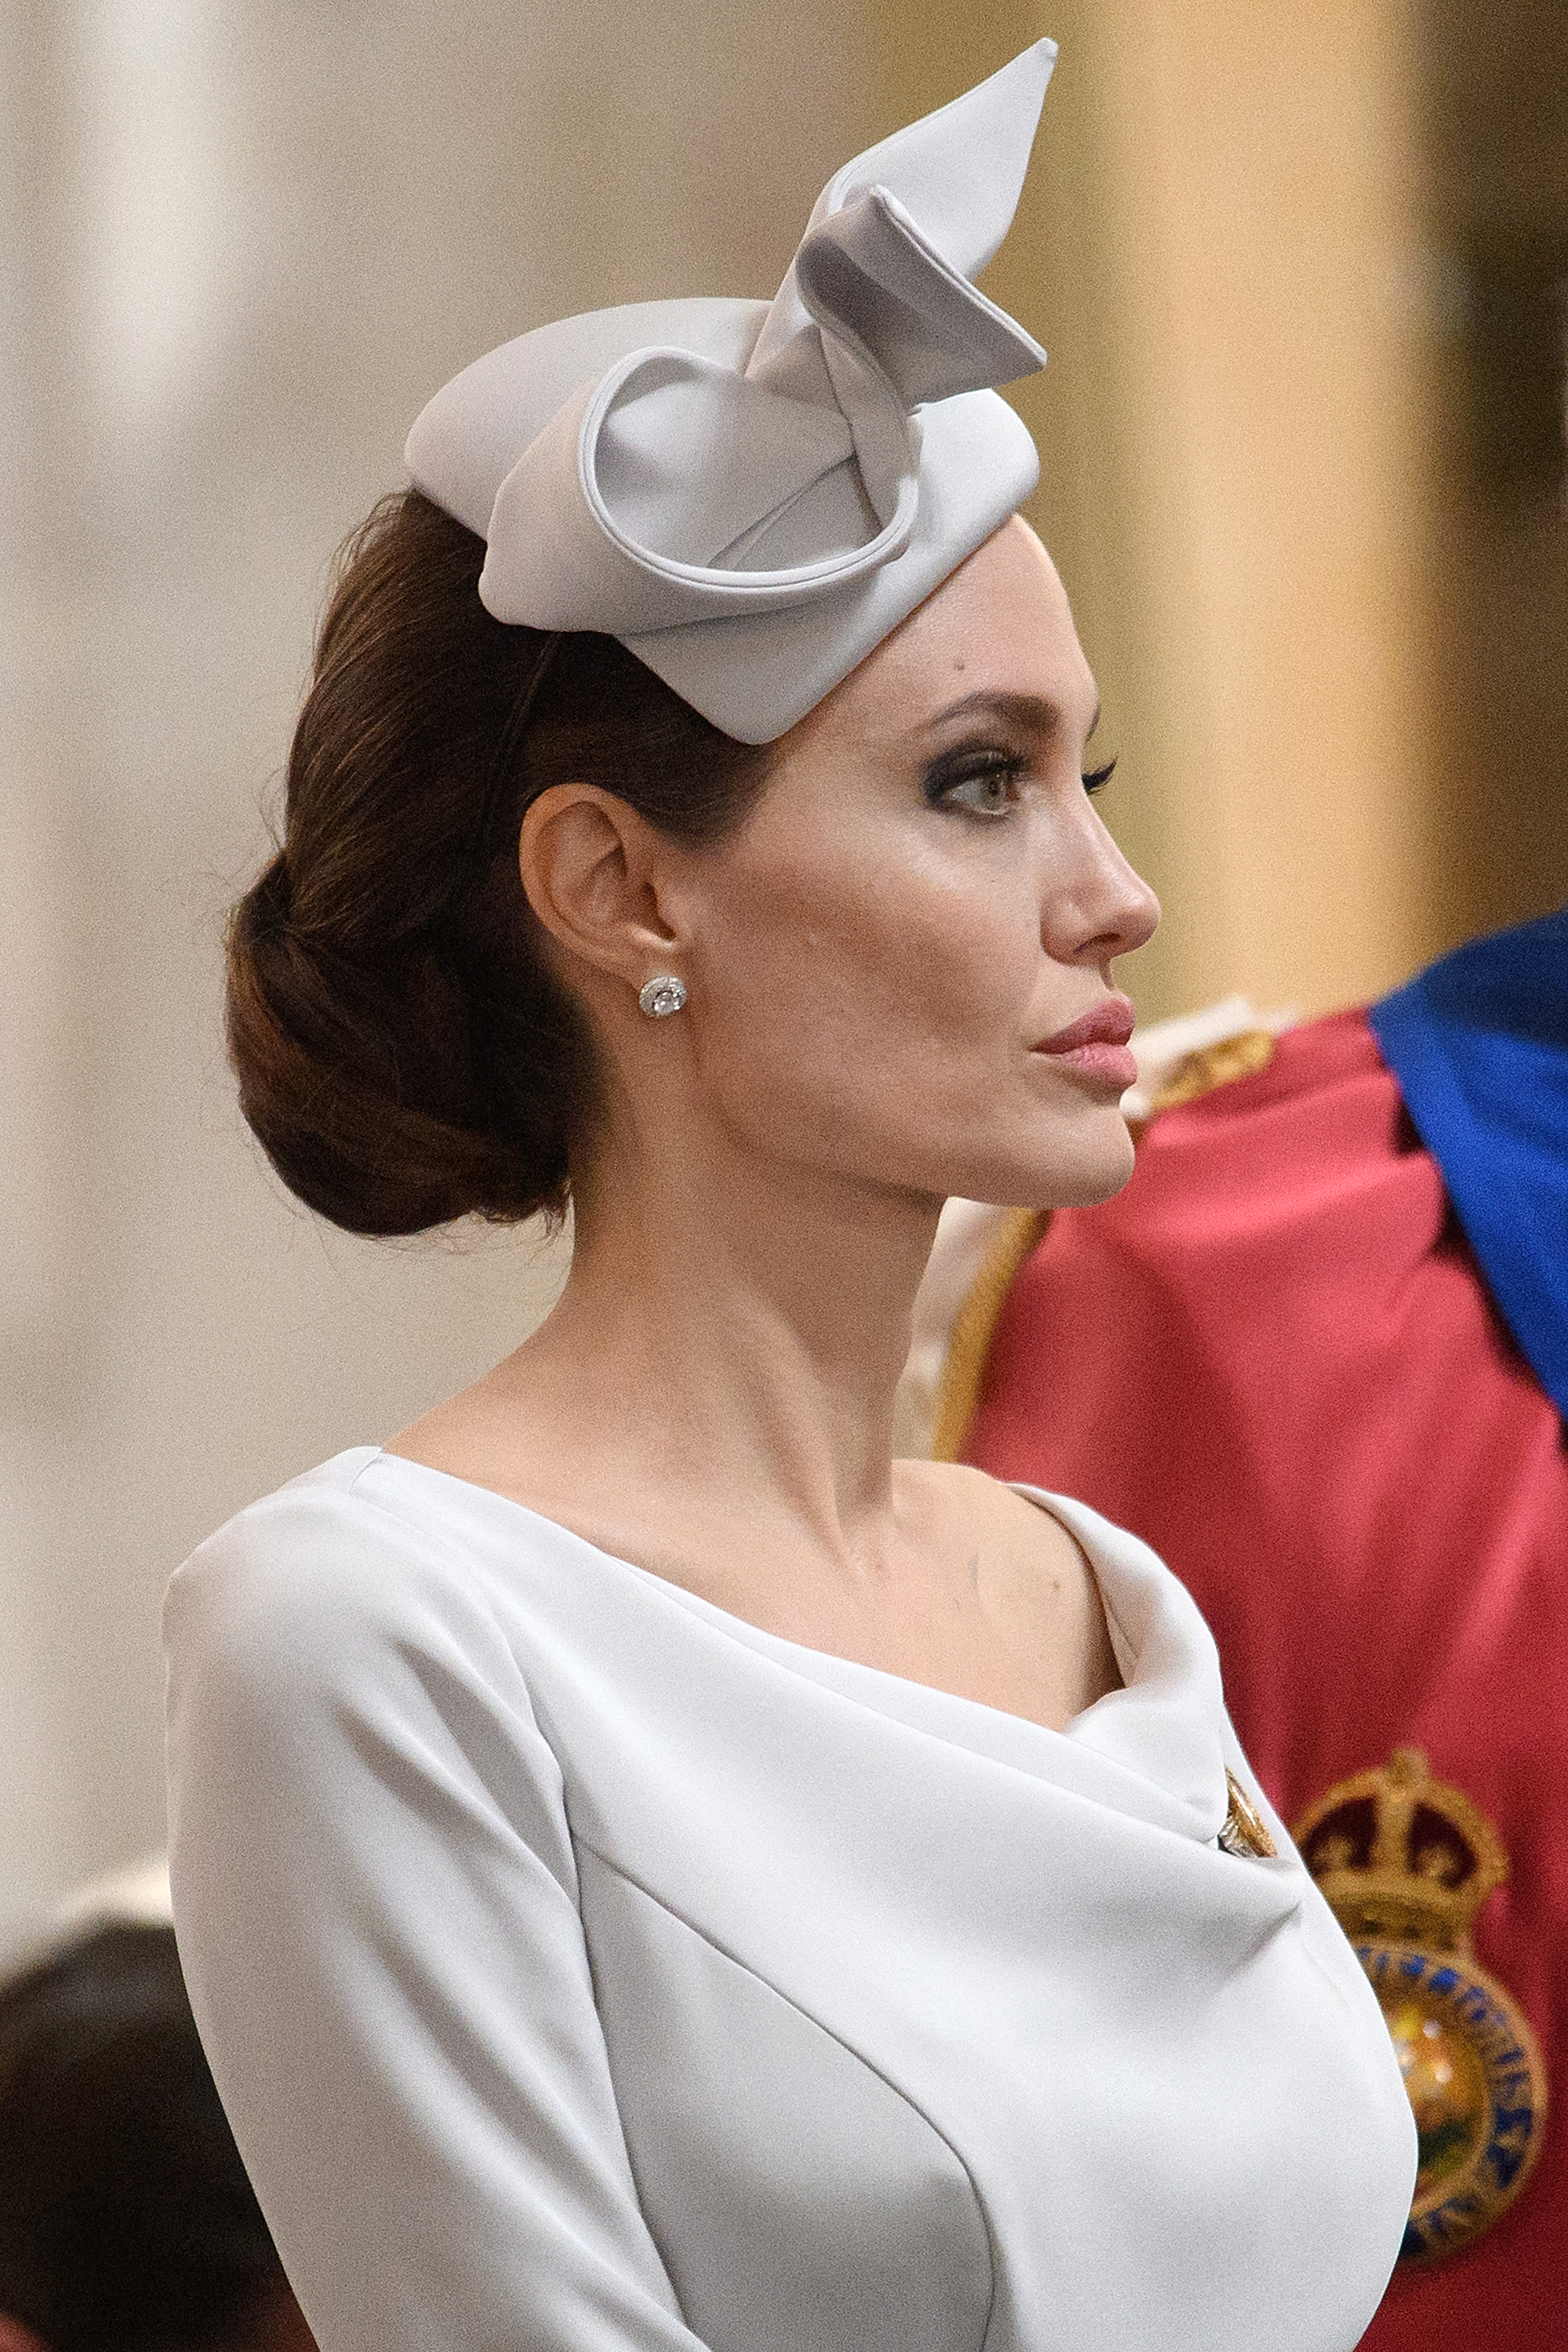 Angelina Jolie arrives ahead of the Service of Commemoration and Dedication, marking the 200th anniversary of the Most Distinguished Order of St Michael and St George at St Paul's Cathedral in London on June 28, 2018. | Source: Getty Images